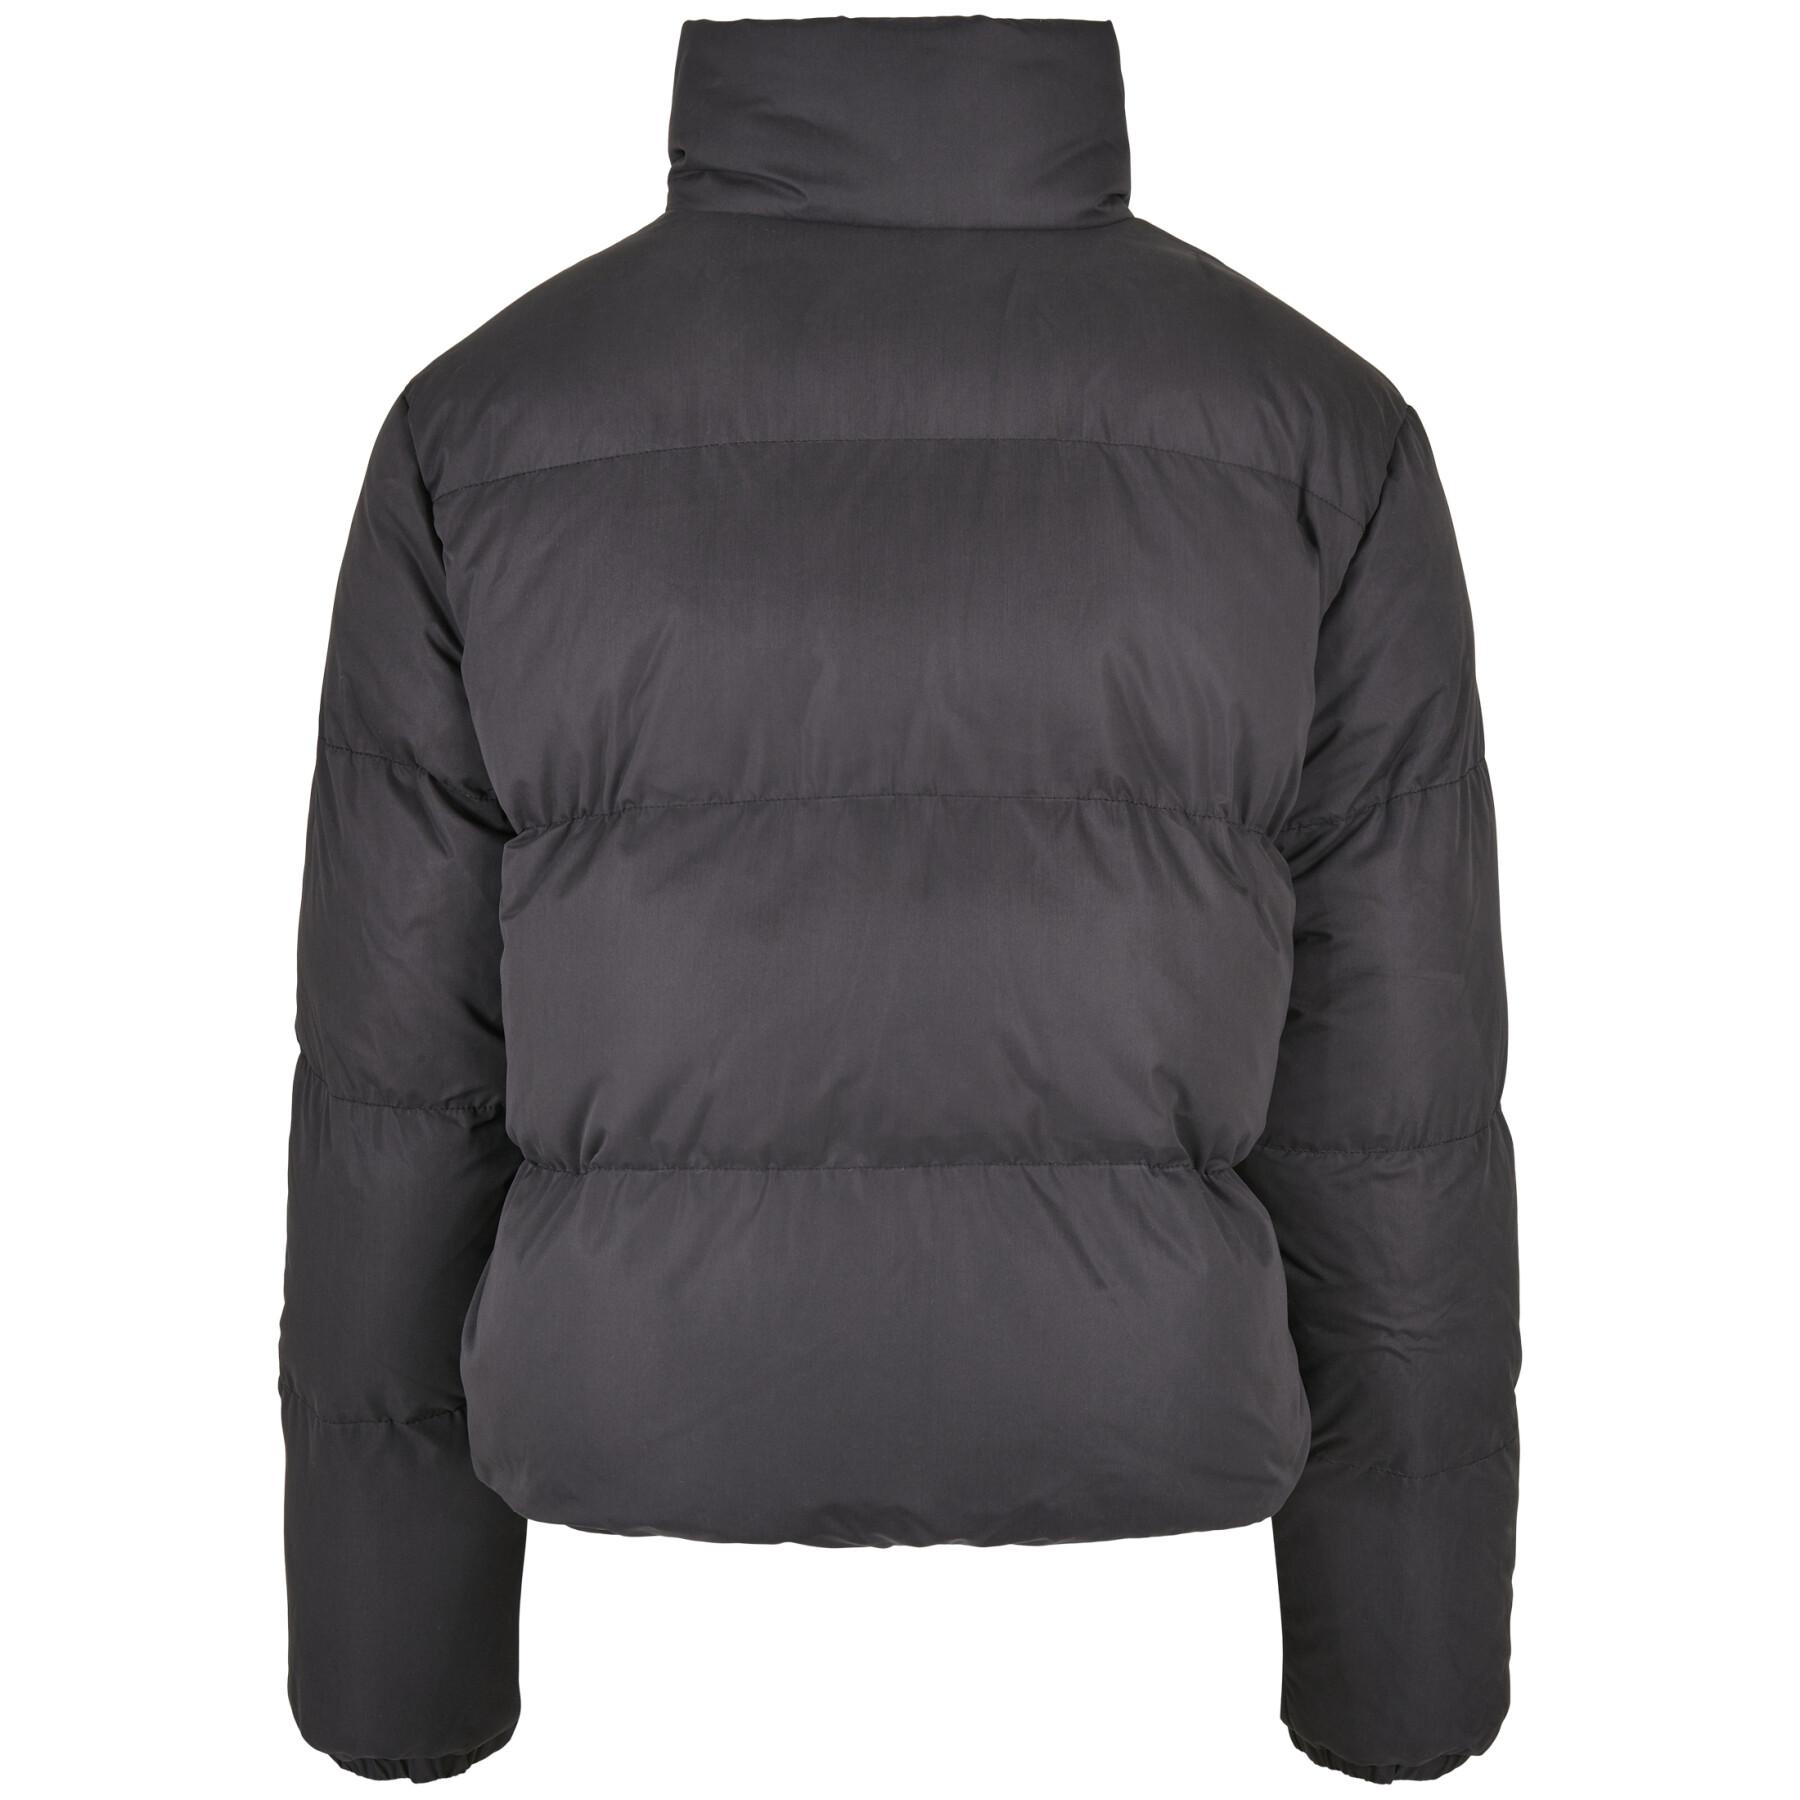 Short Quilted Puffer Jacket Urban Classics